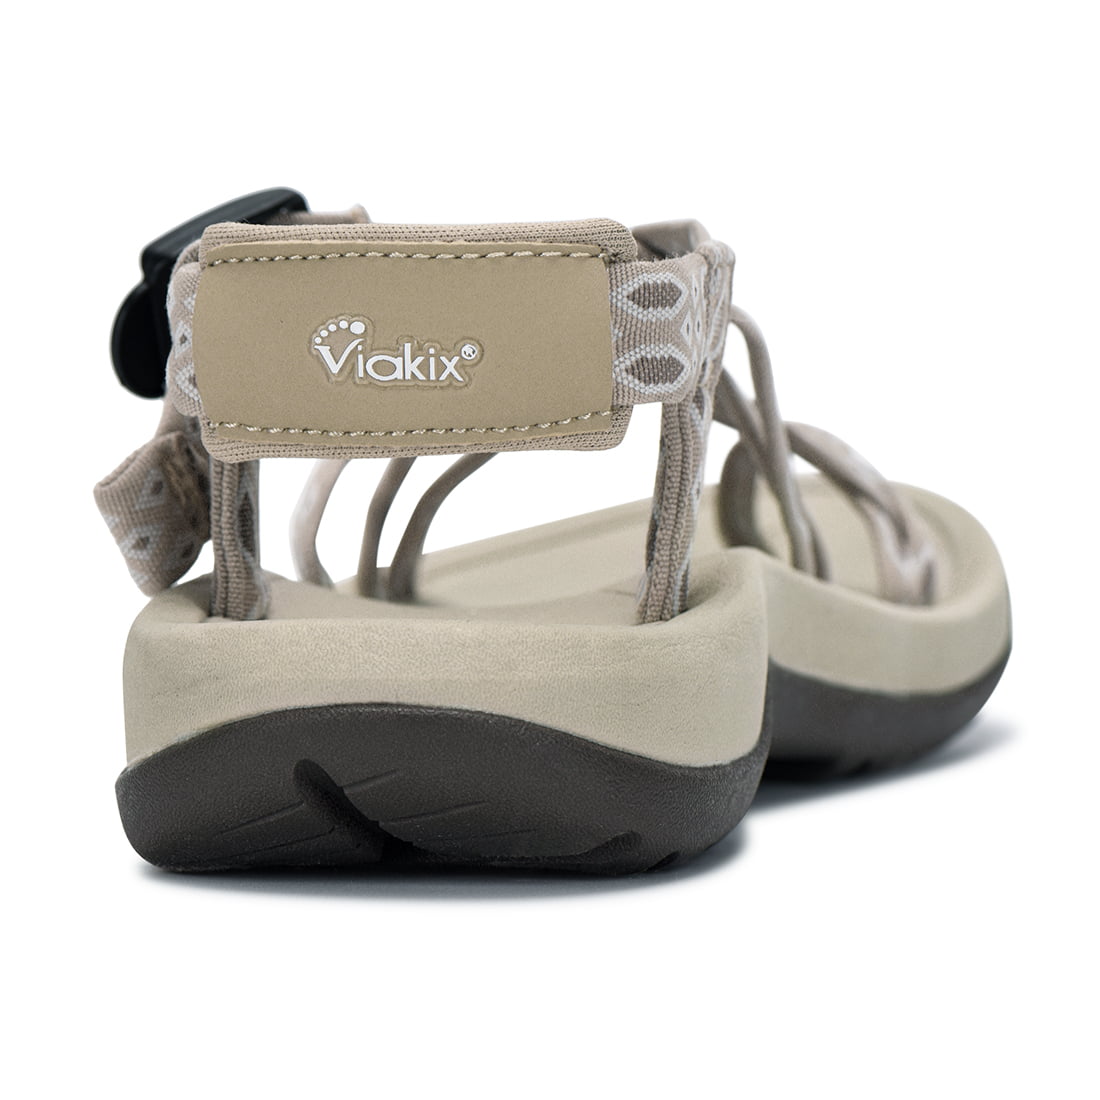 Ultra Comfortable Womens Sandals With Support Viakix Siena Walking Sandals 